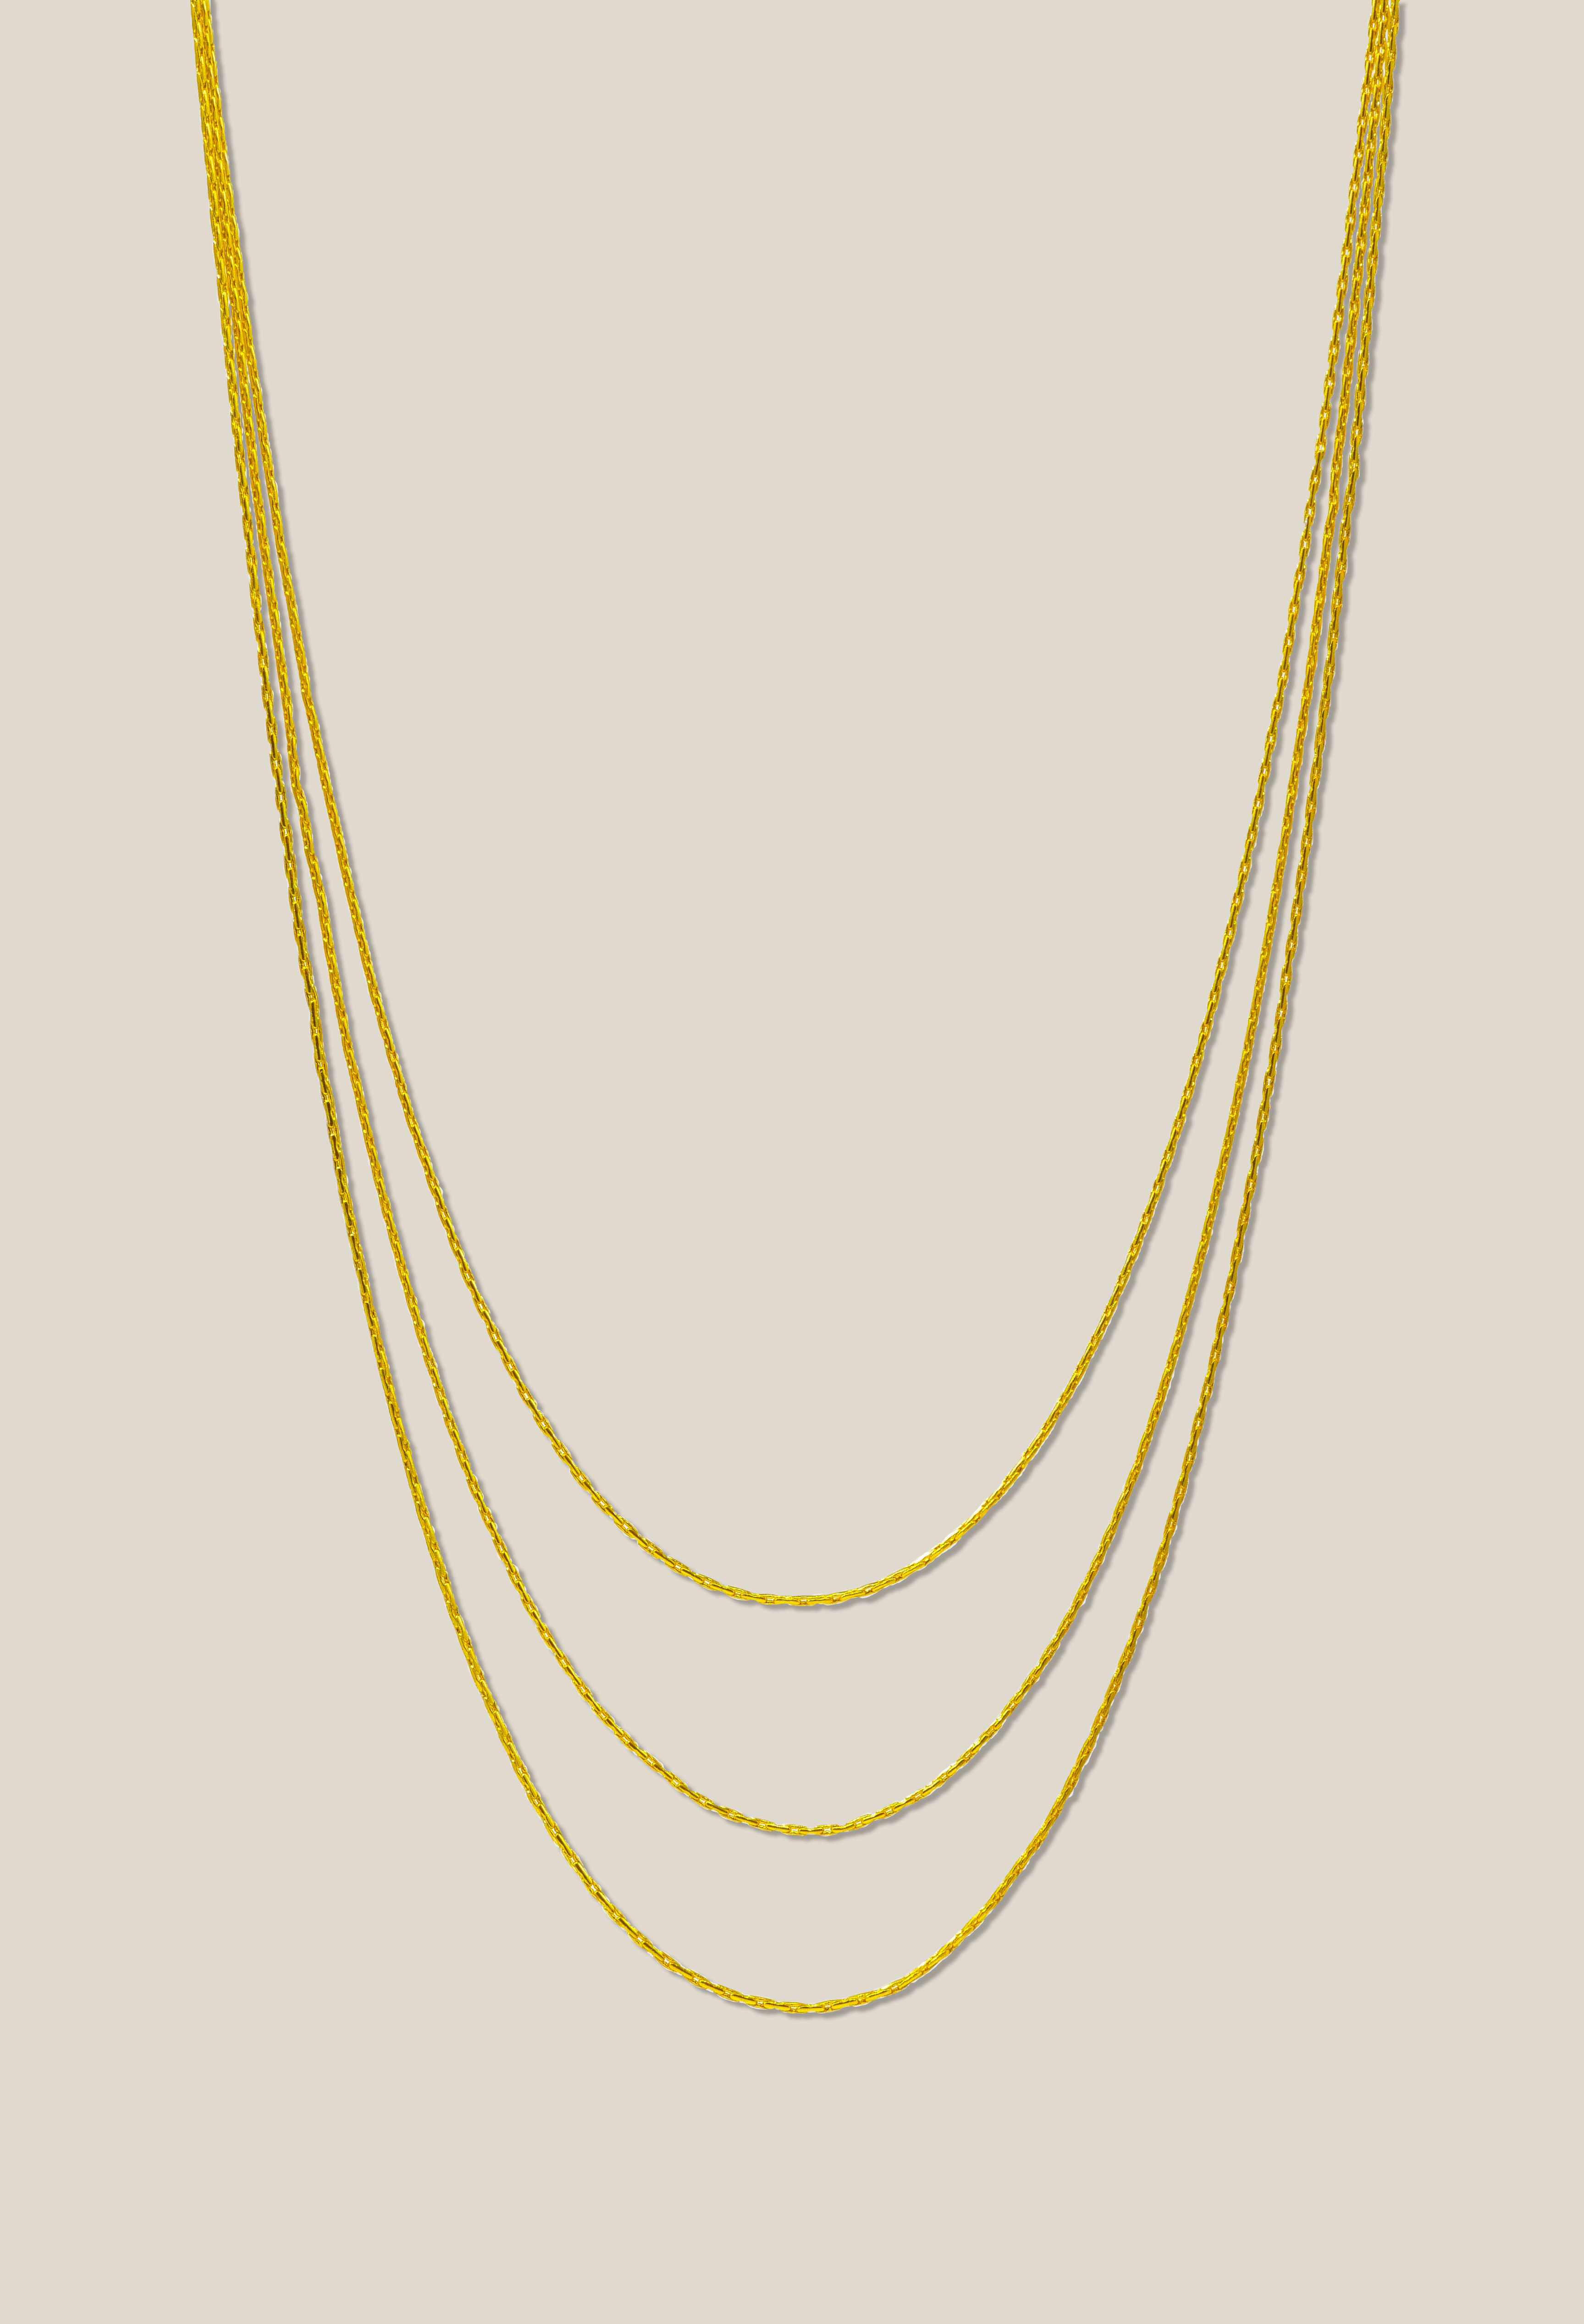 THANKE GOLD (NECKLACE)